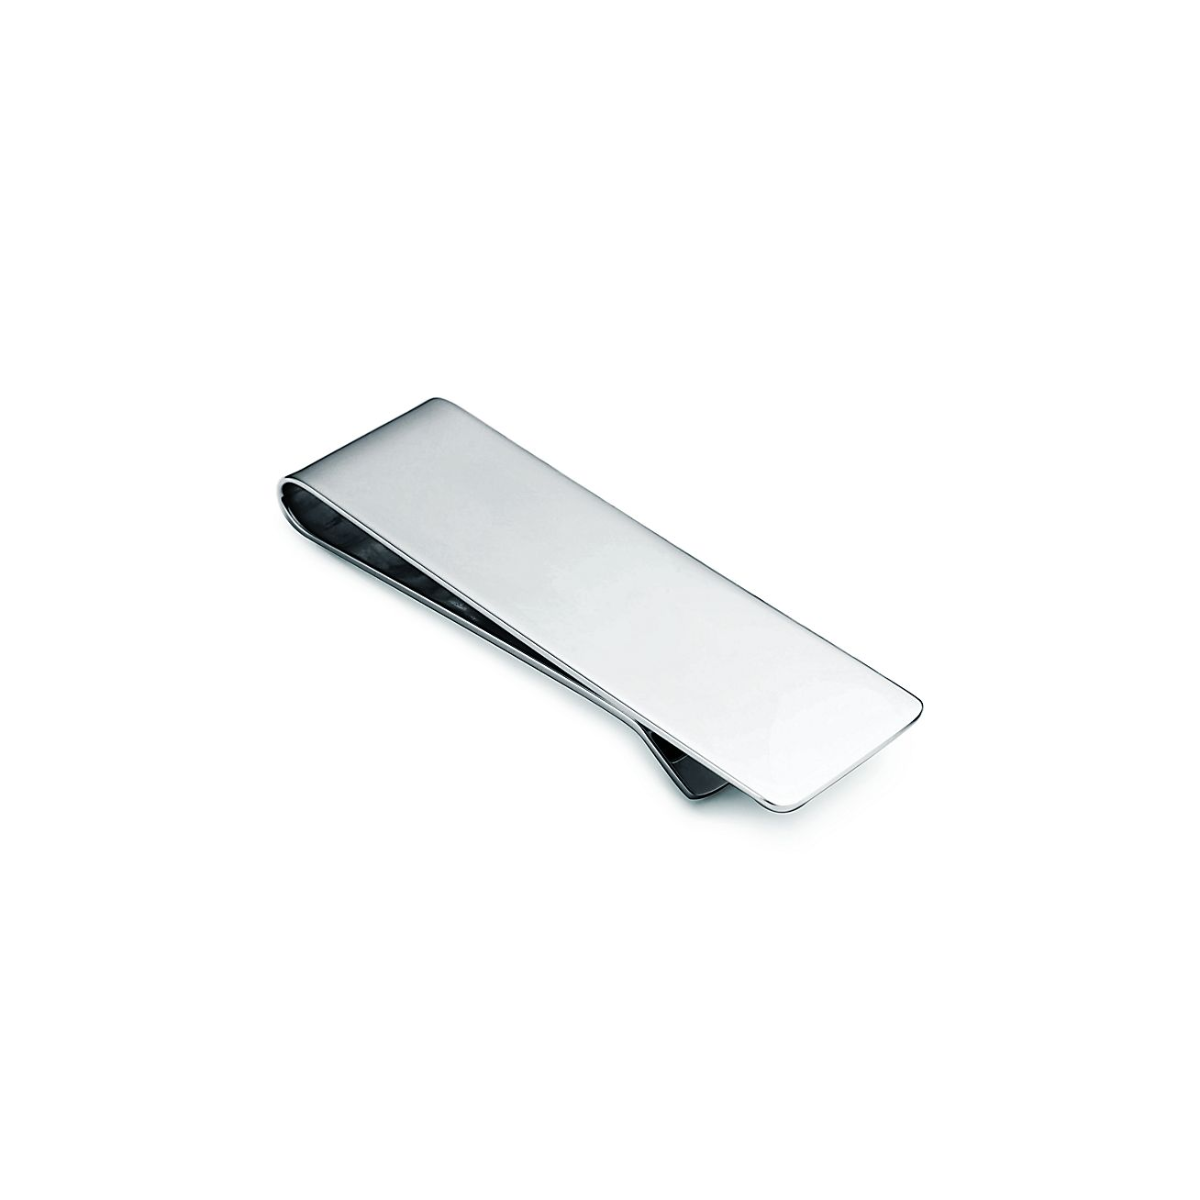 23. Silver Money Clip: A Unique and Thoughtful Anniversary Gift for Him